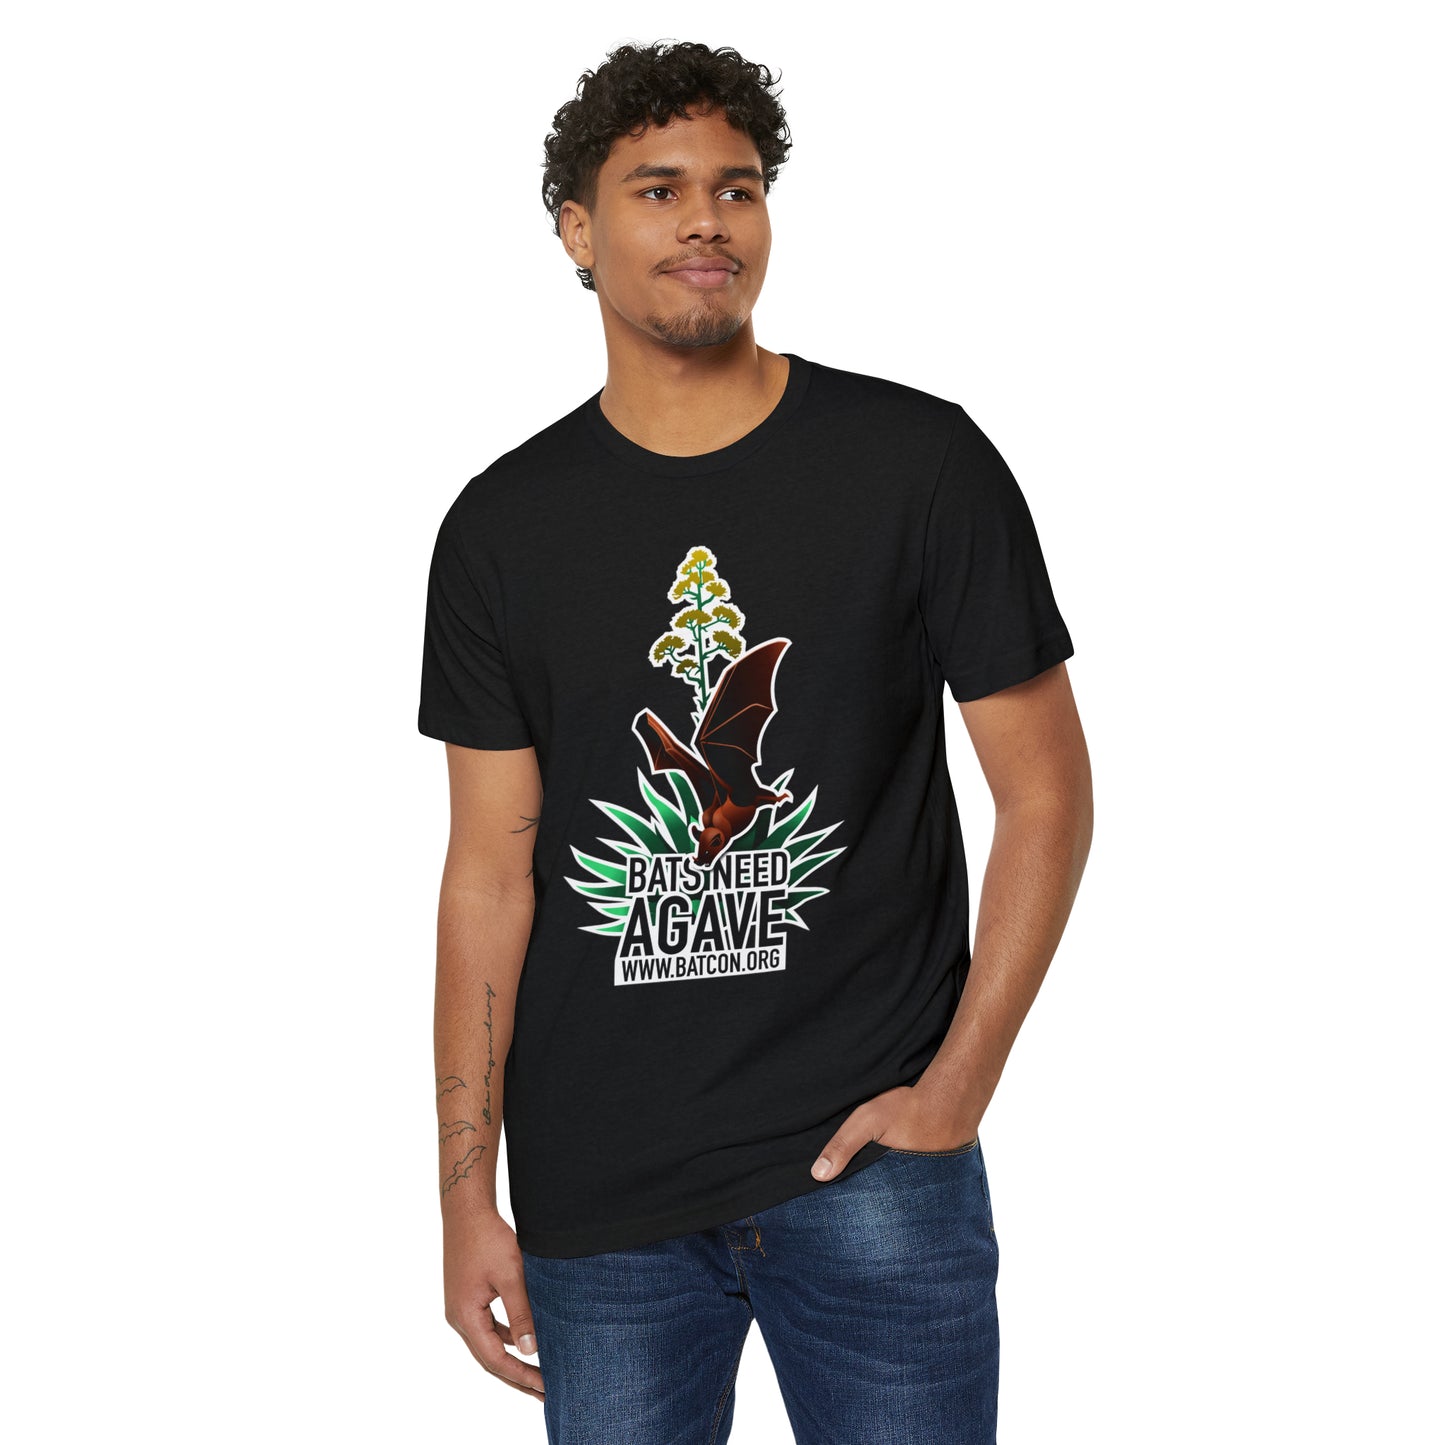 Bats Need Agave - Unisex Organic Recycled T-Shirt